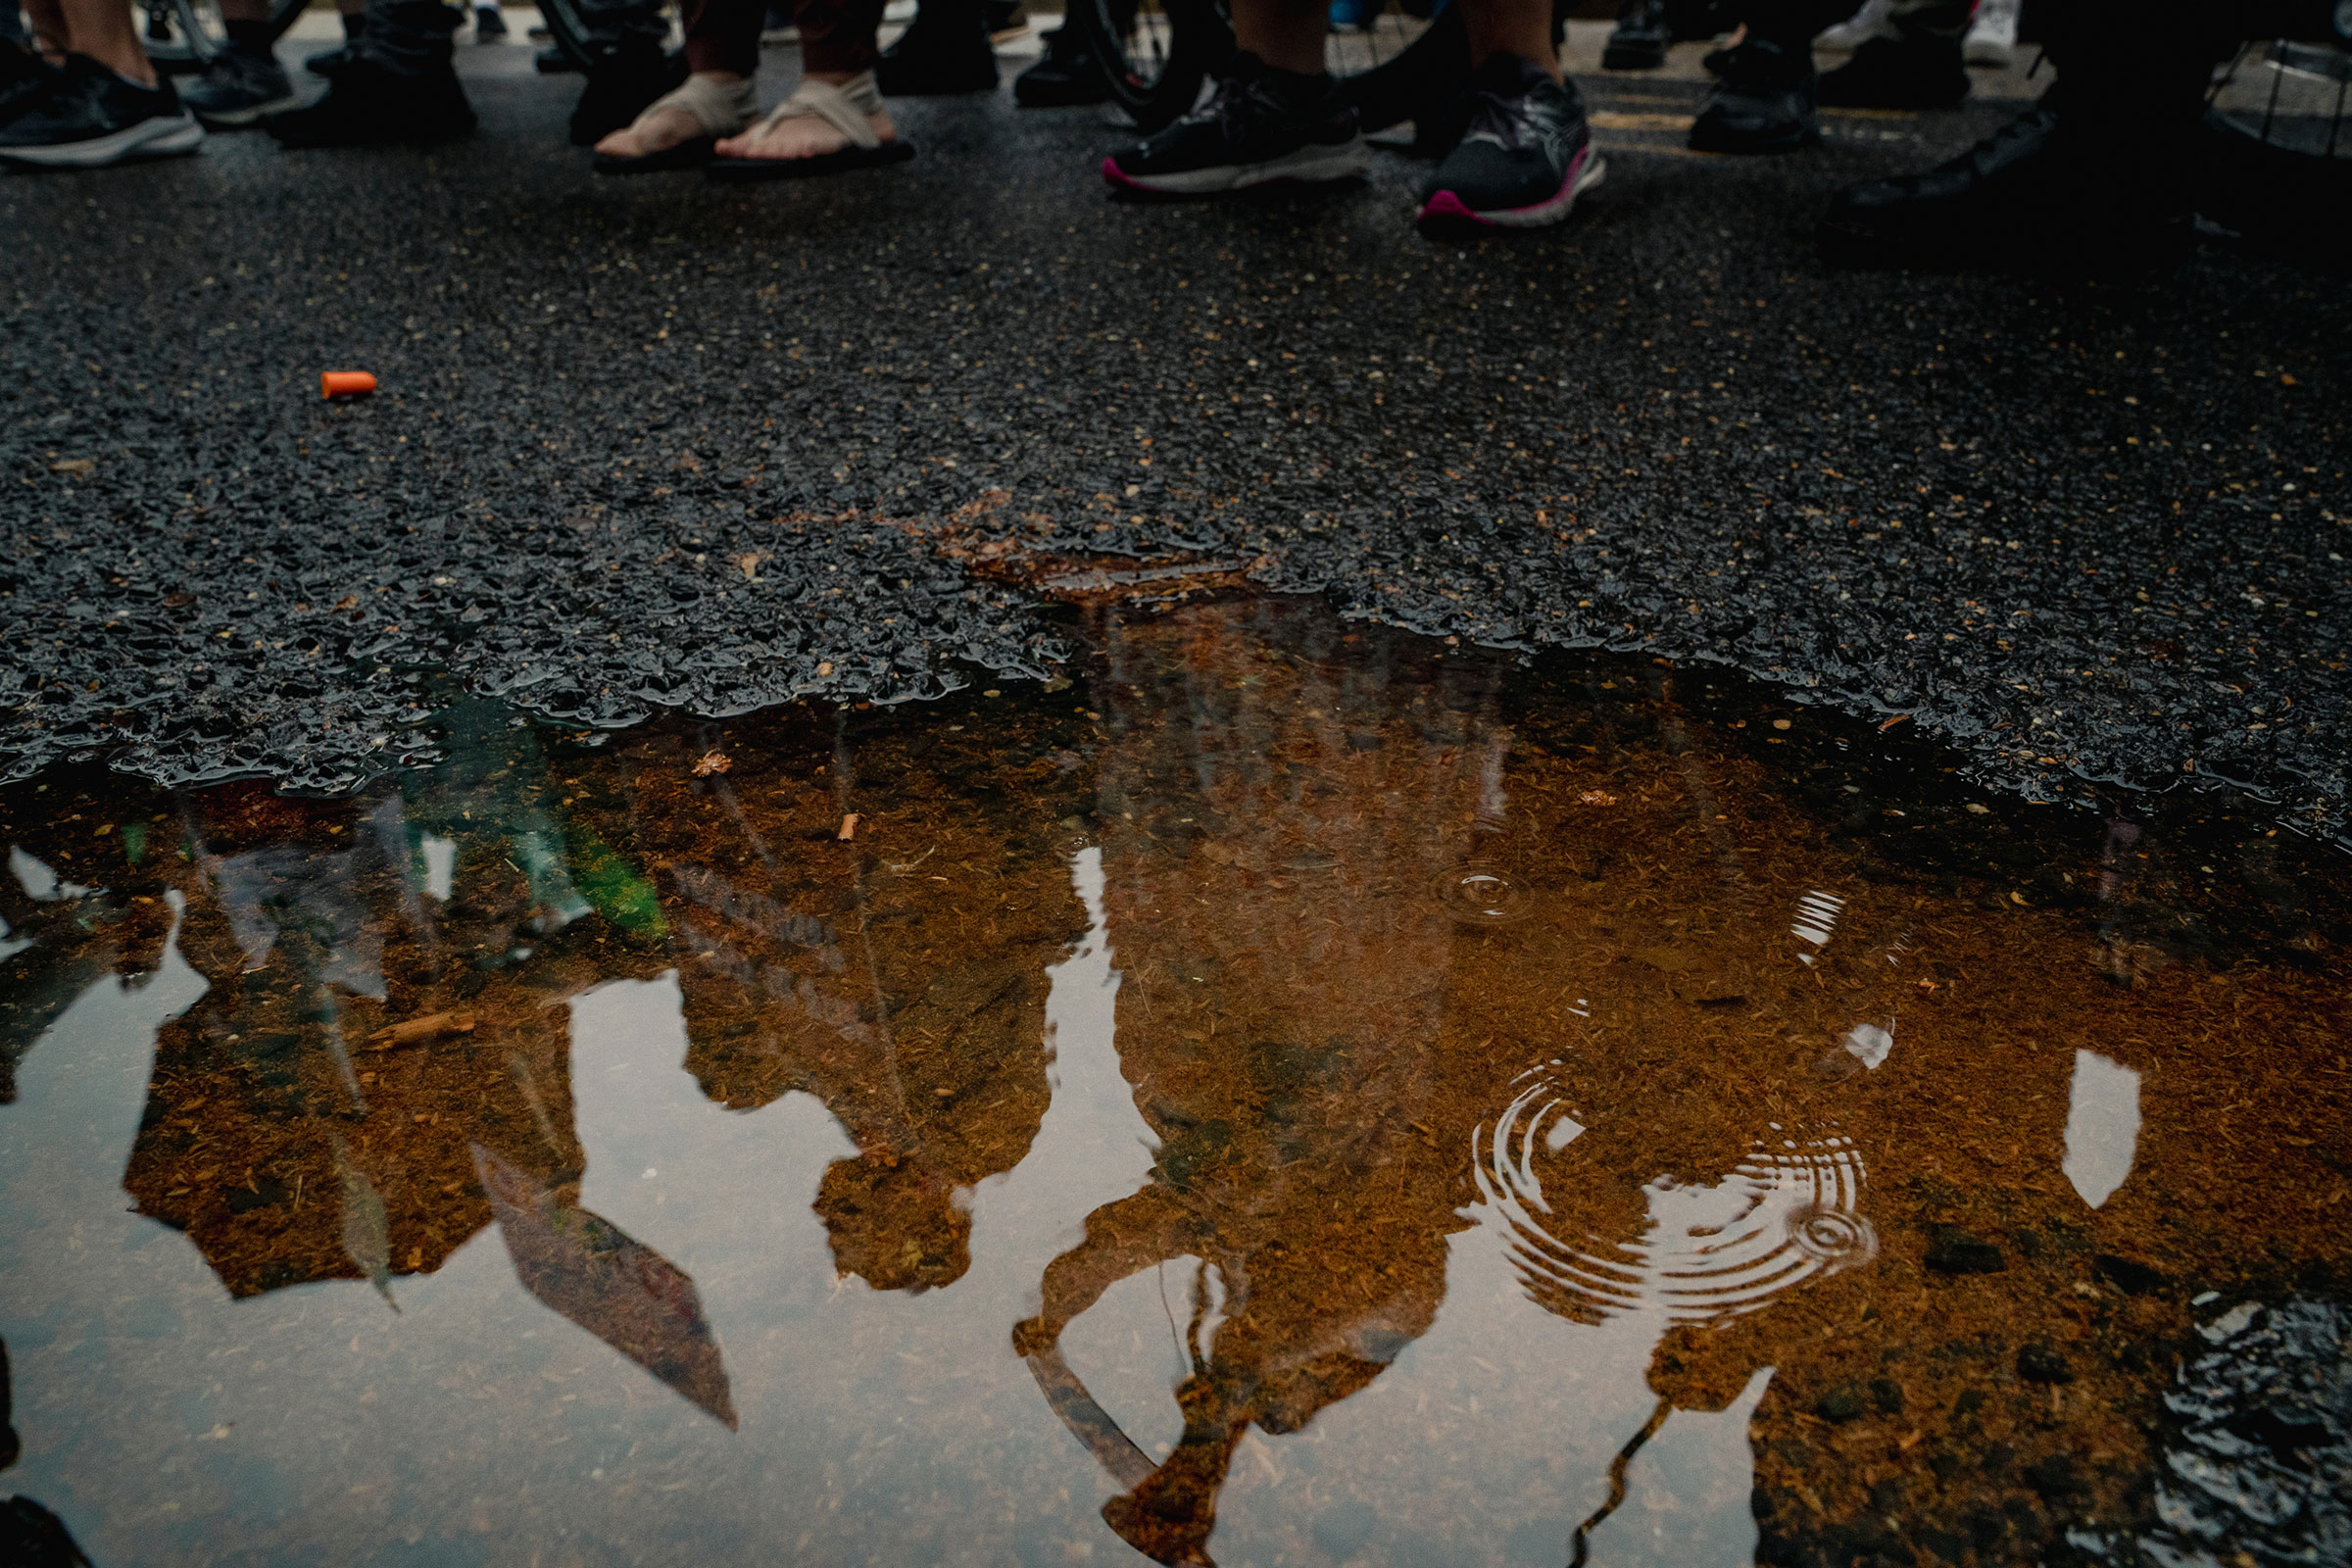 A reflection of supporters and opponents of abortion rights demonstrating is seen outside the U.S. Supreme Court Building on June 23, 2022 in Washington, DC. Decisions are expected in 13 more cases before the end of the Court's current session. (Photo/Shuran Huang)